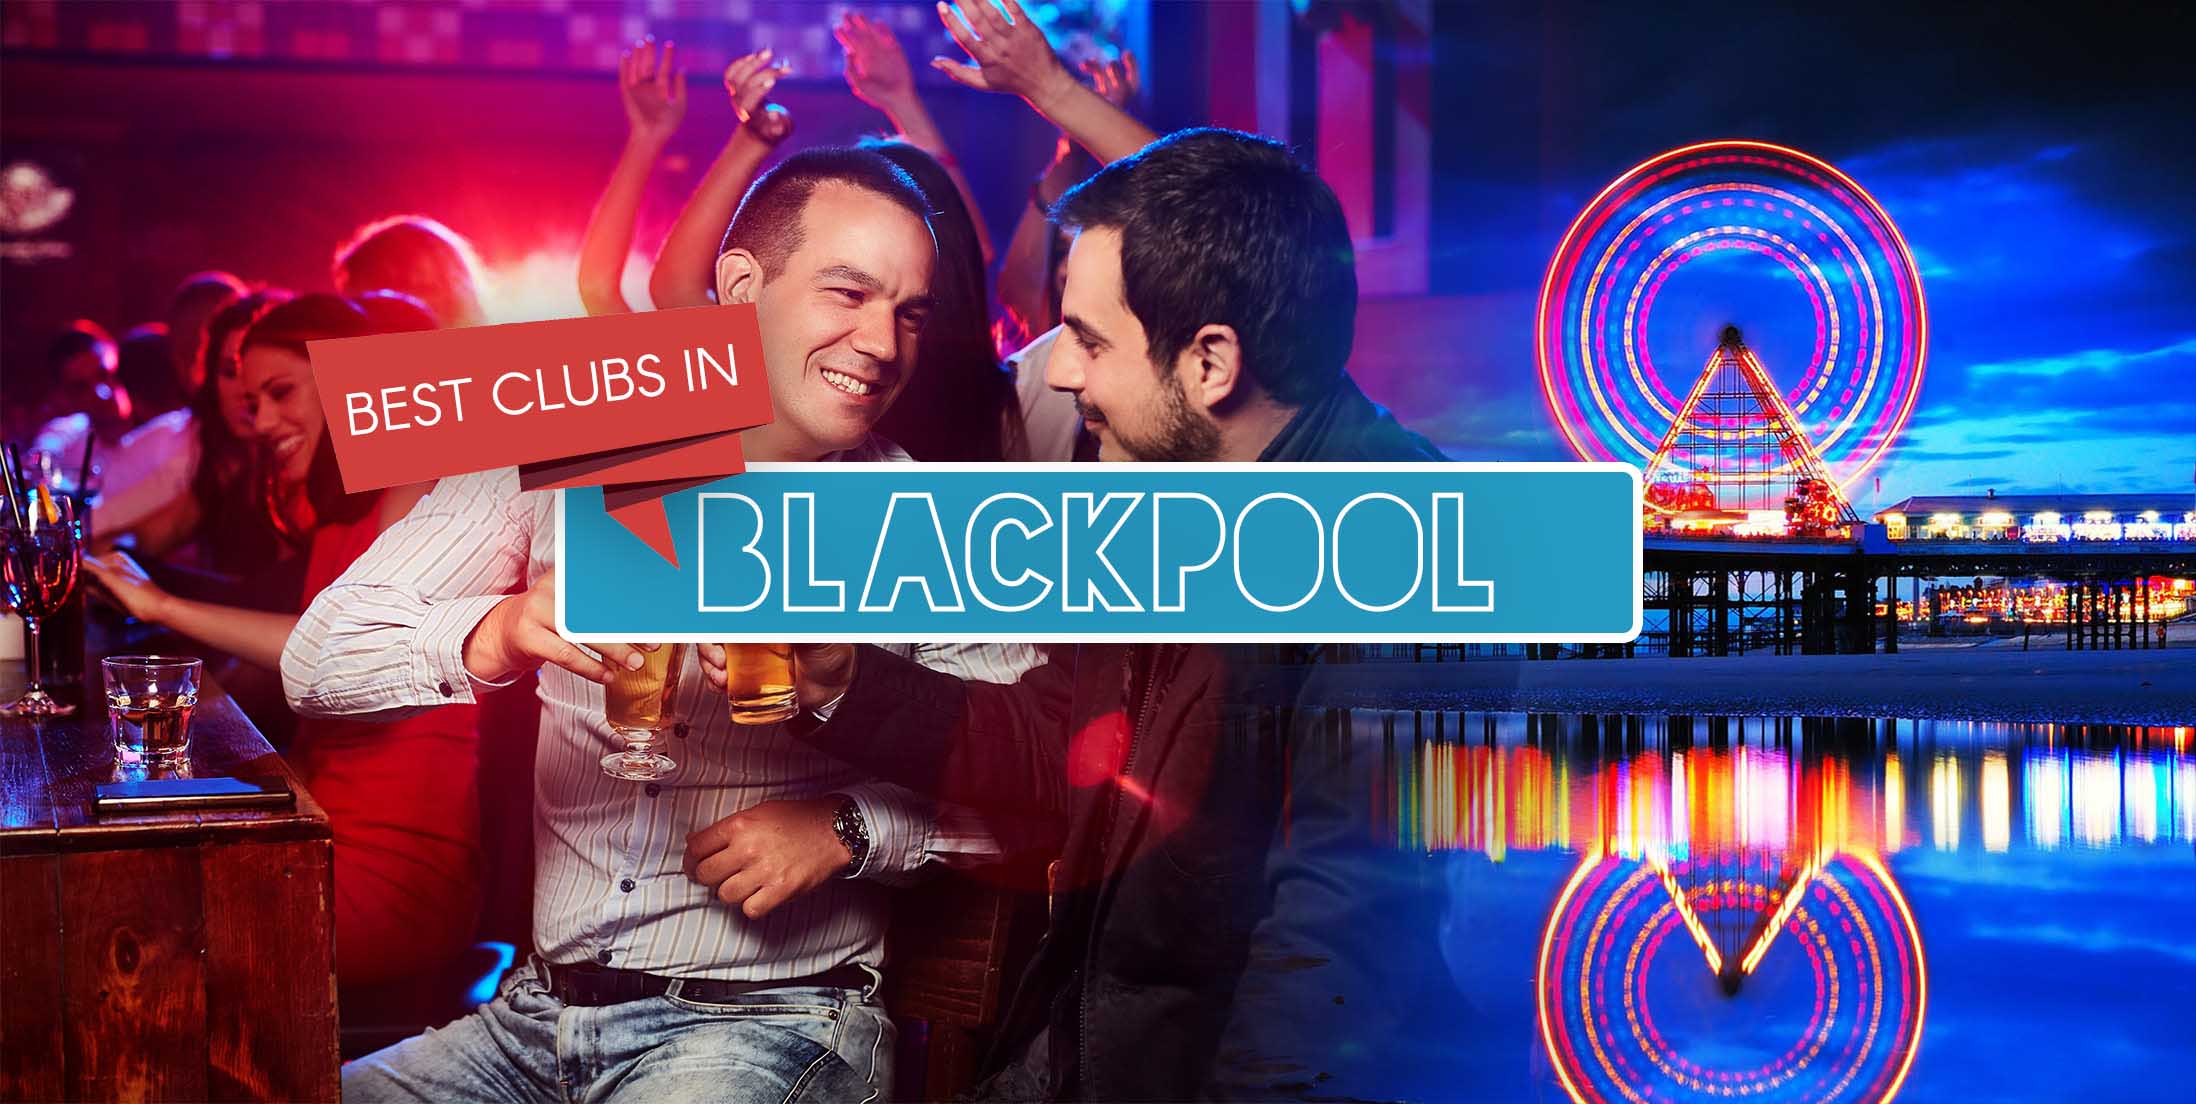 Best Clubs in Blackpool